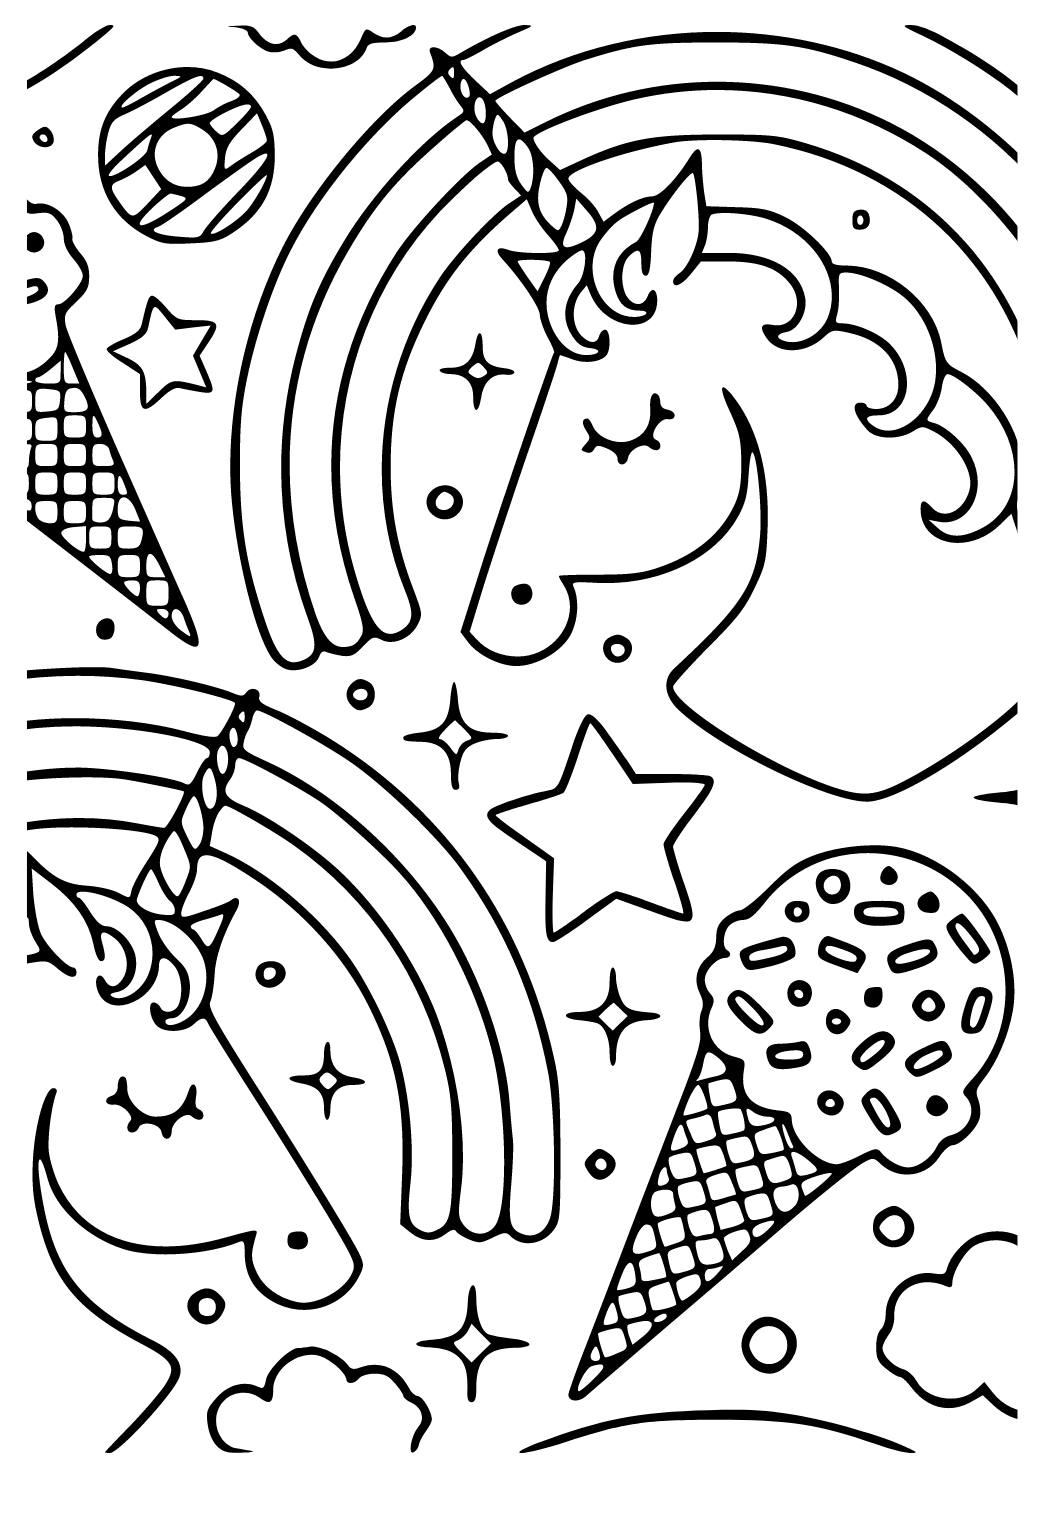 Free Printable Unicorn Ice Cream Coloring Page for Adults and Kids ...